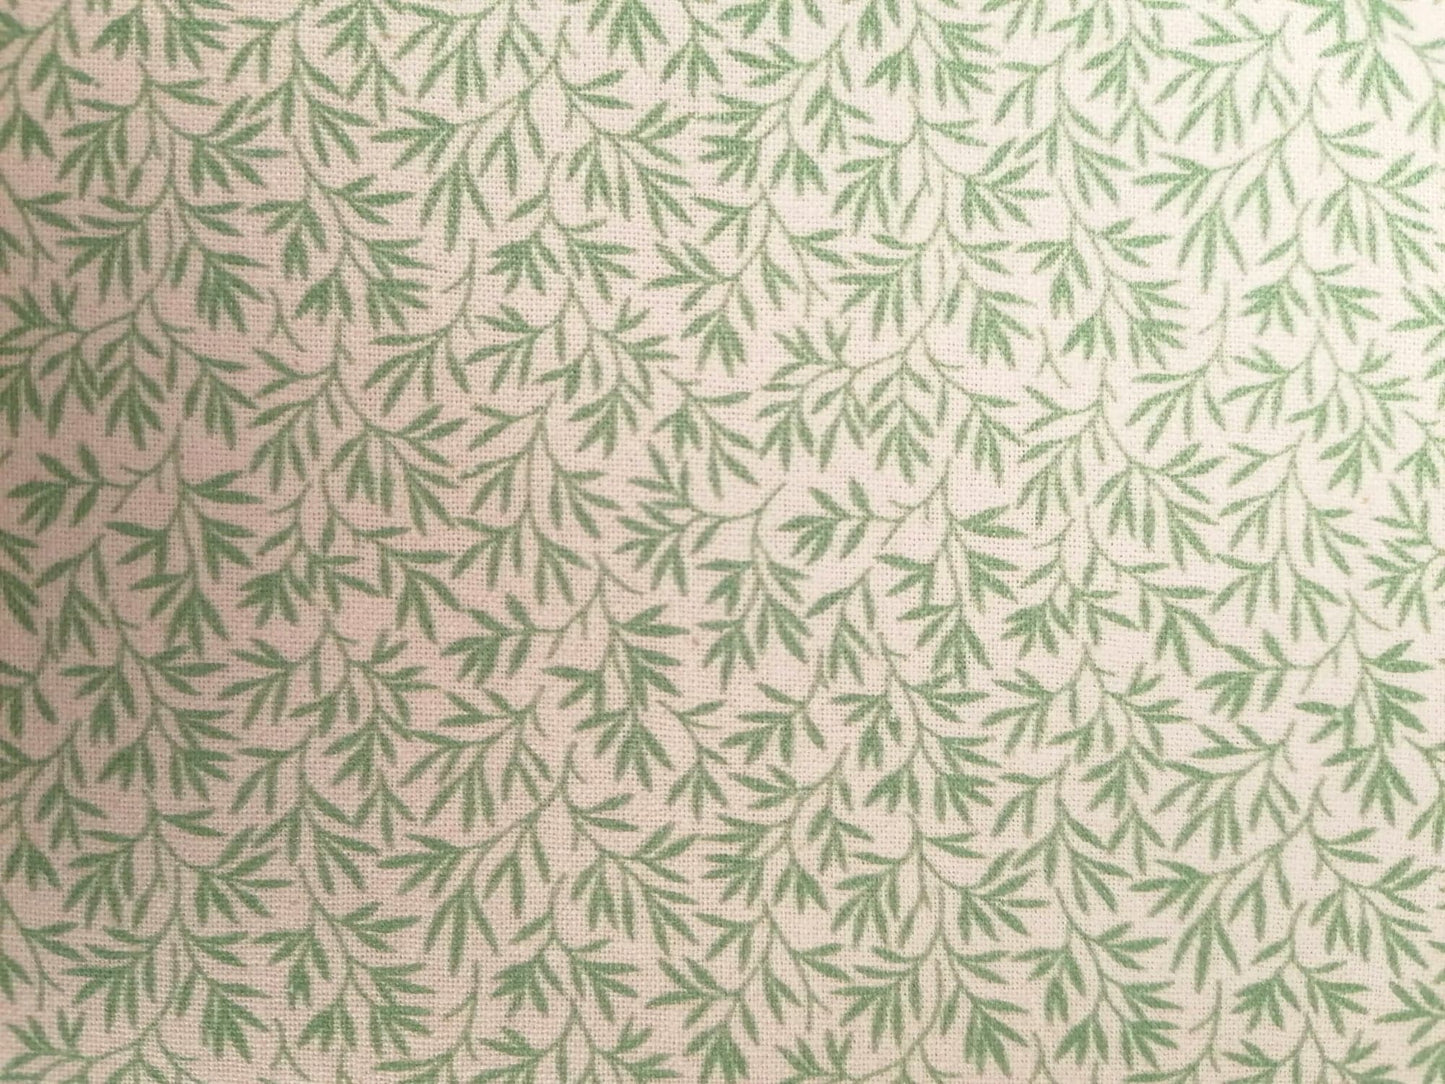 100% Cotton - Crafting & Quilting - Cream/Green - 44" Wide - Sold By the Metre